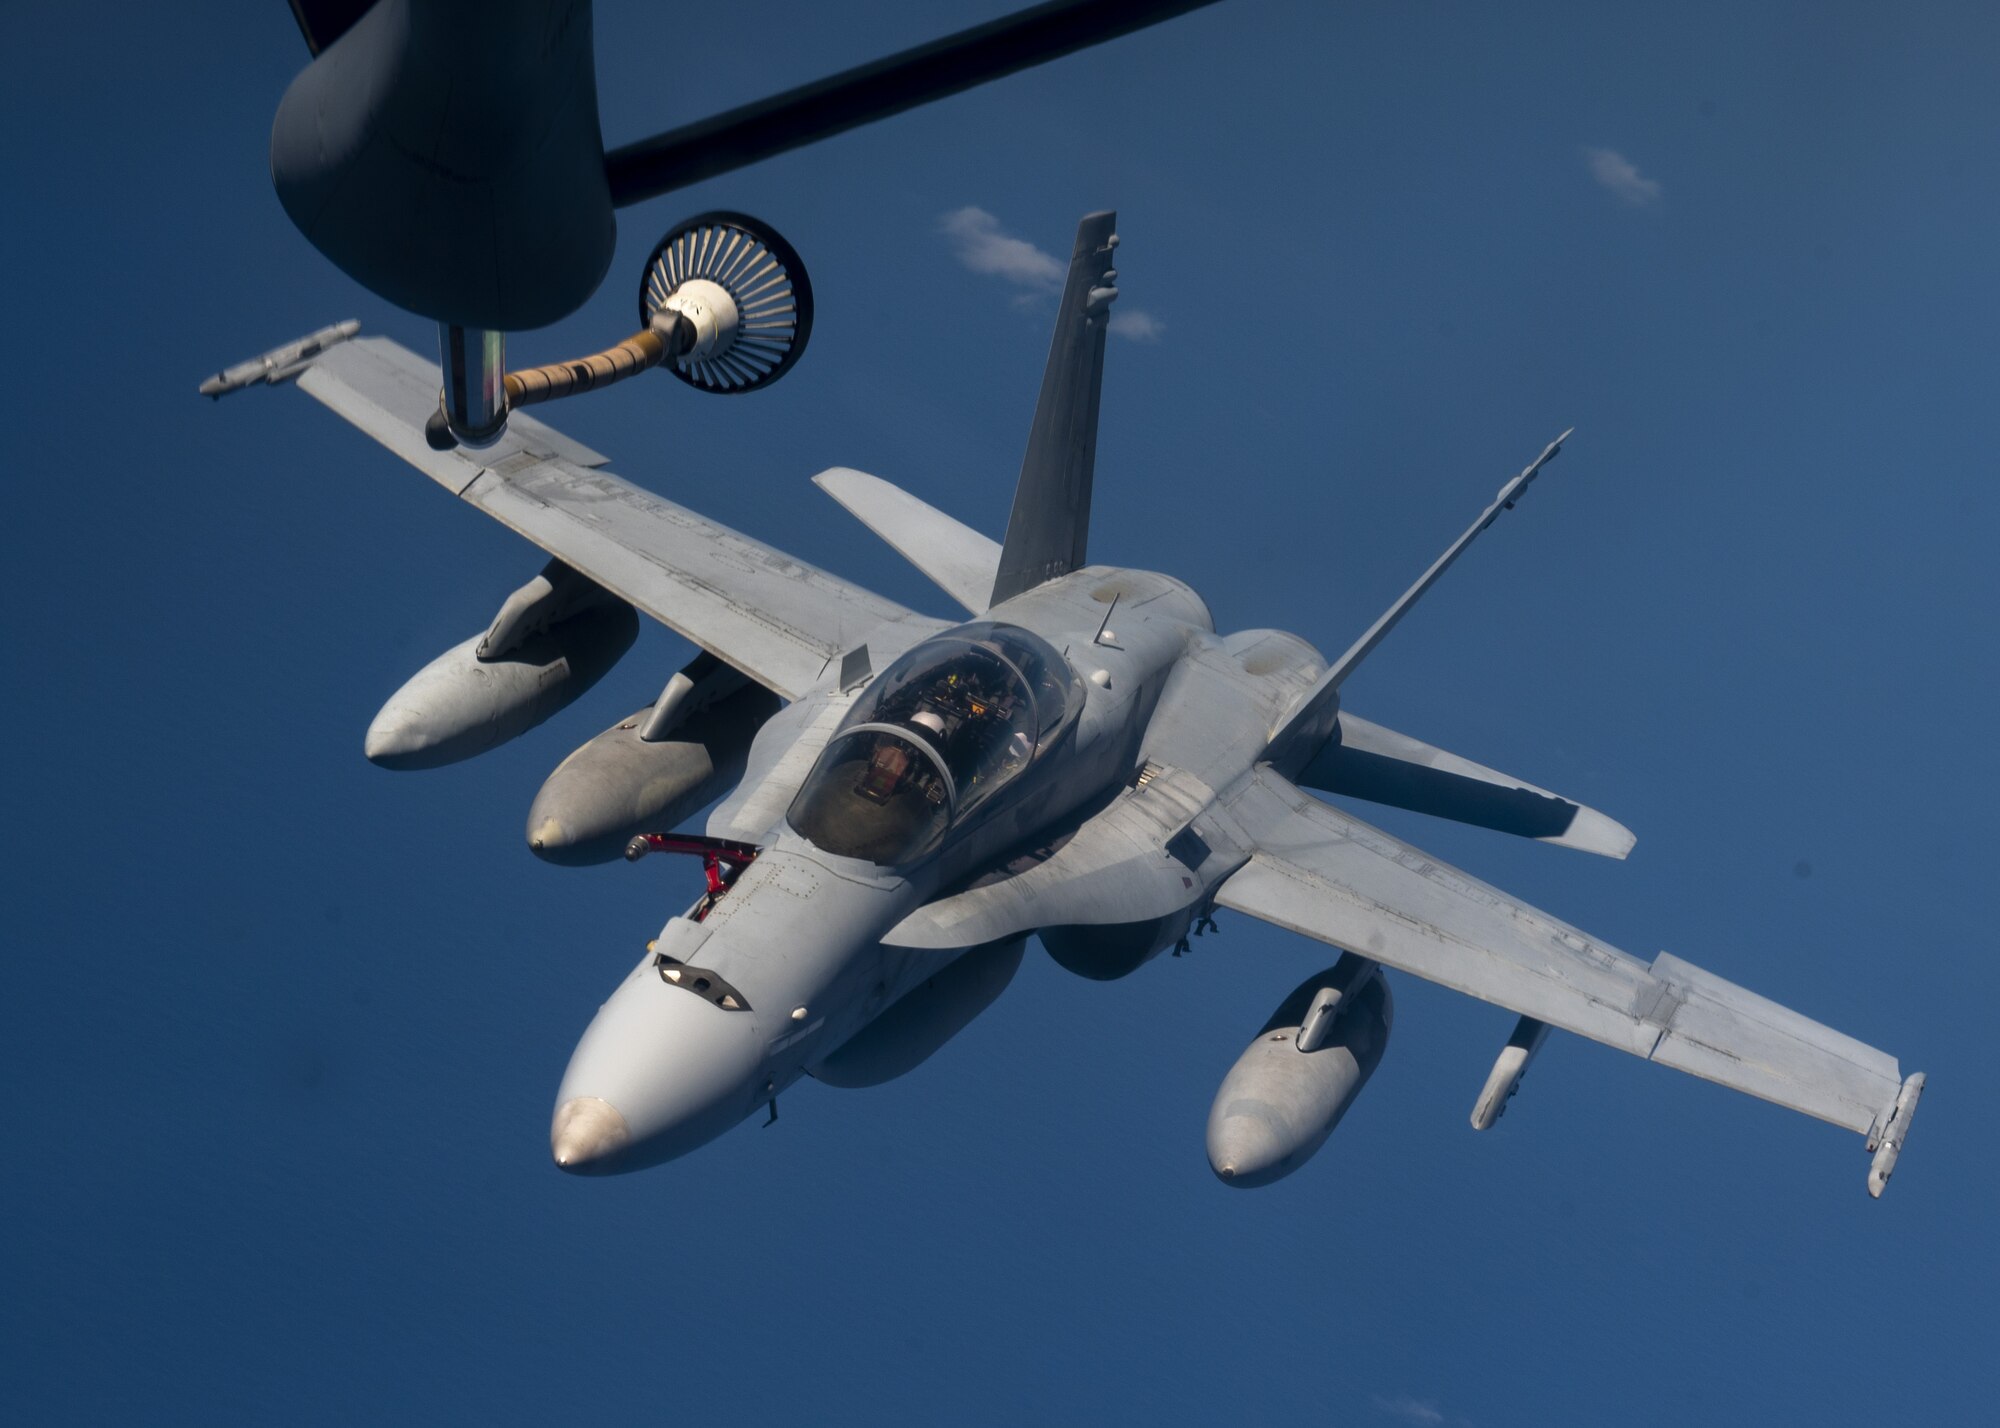 A U.S. Marine Corps F/A-18C Hornet prepares to be refueled by a U.S. Air Force KC-135 Stratotanker from Fairchild Air Force Base over the Pacific, March 9, 2023. Aircrew from the 384th Air Refueling Squadron conducted an air refueling coronet with Marines from the Marine Fighter Attack Squadron 312, demonstrating the critical role mobility forces have in projecting the joint force anywhere, anytime. (U.S. Air Force photo by Staff Sgt. Lawrence Sena)